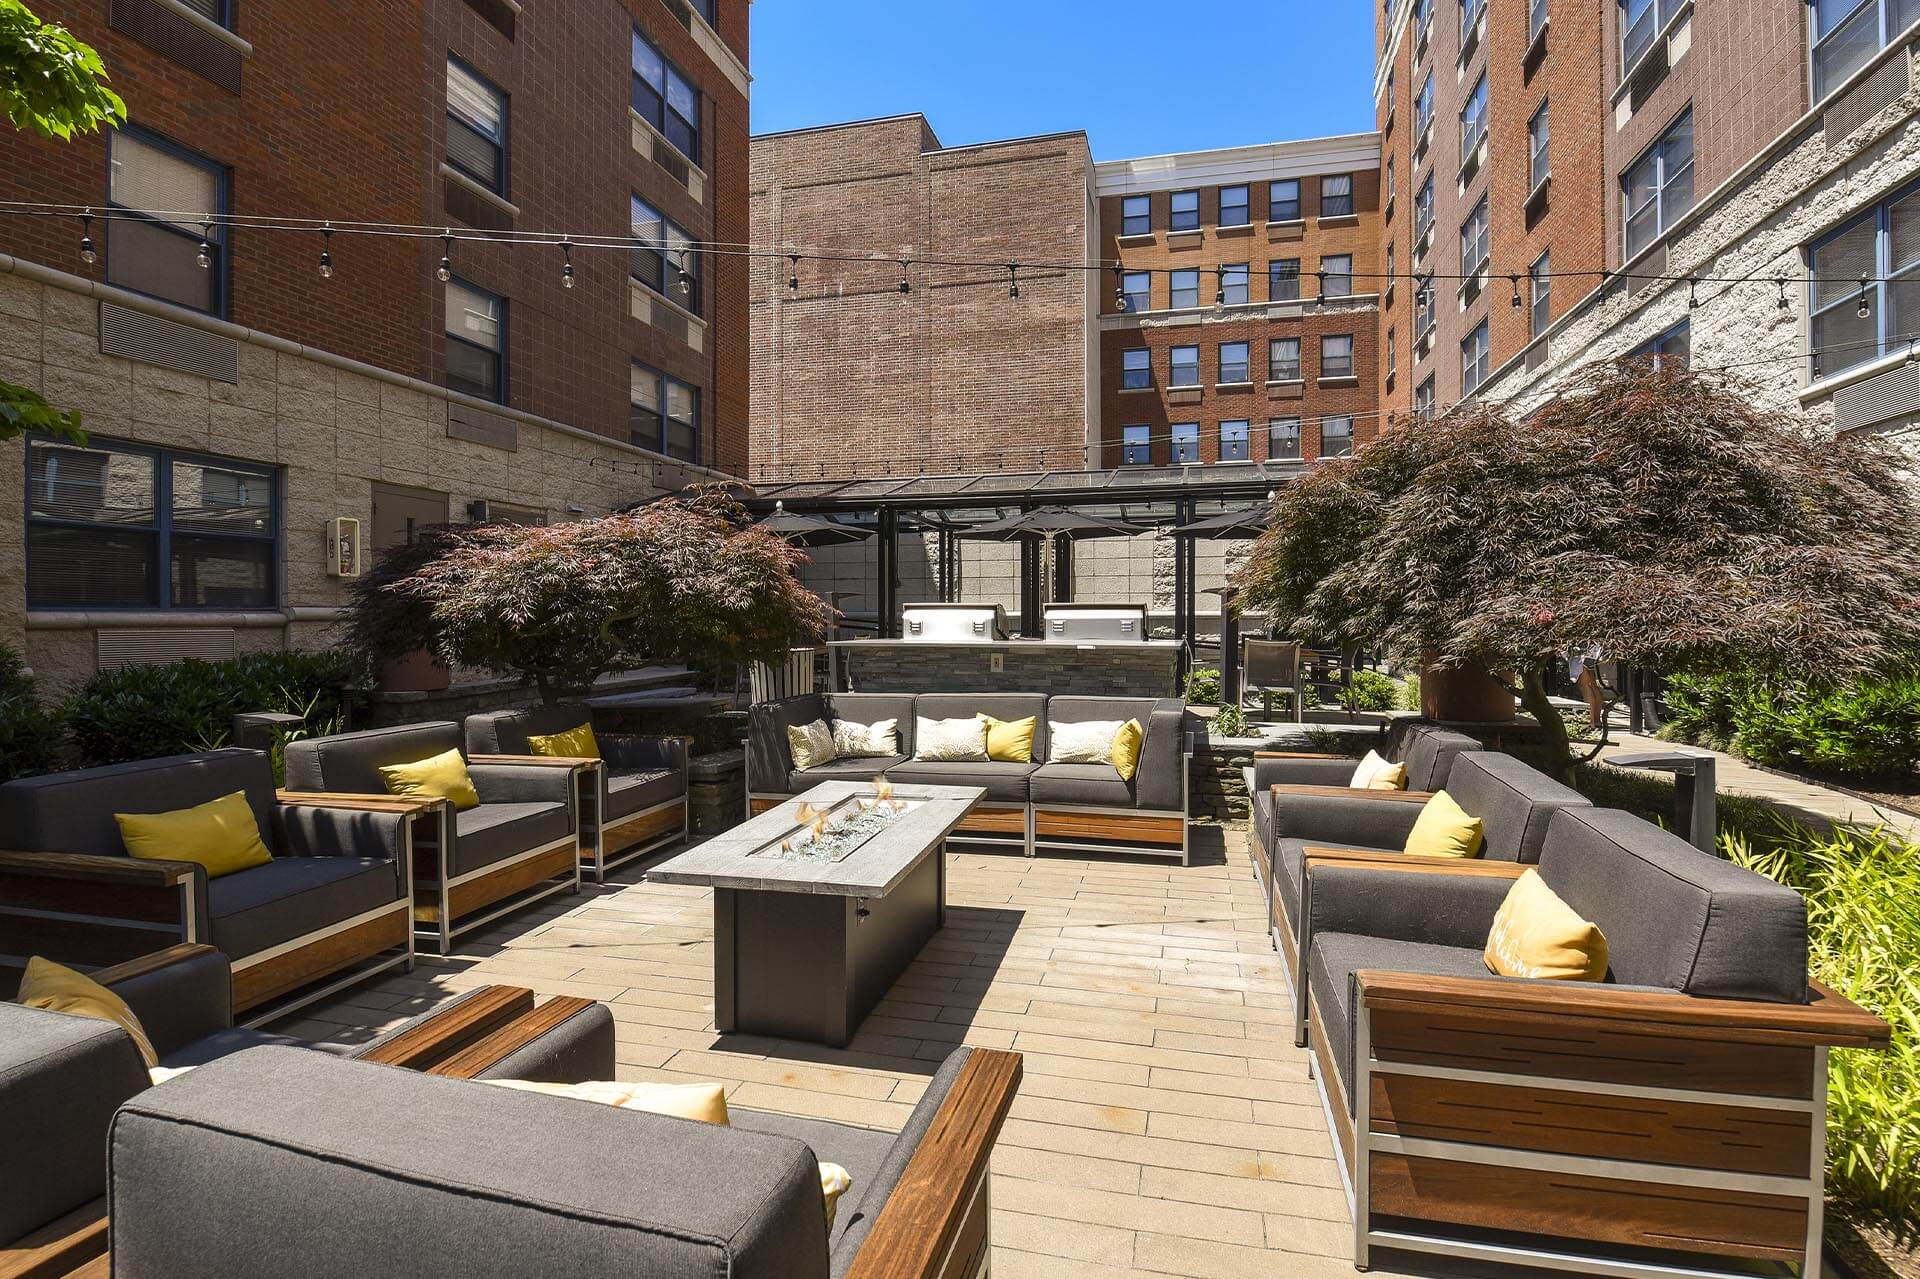 Courtyard with chairs at The Monroe, Morristown, New Jersey